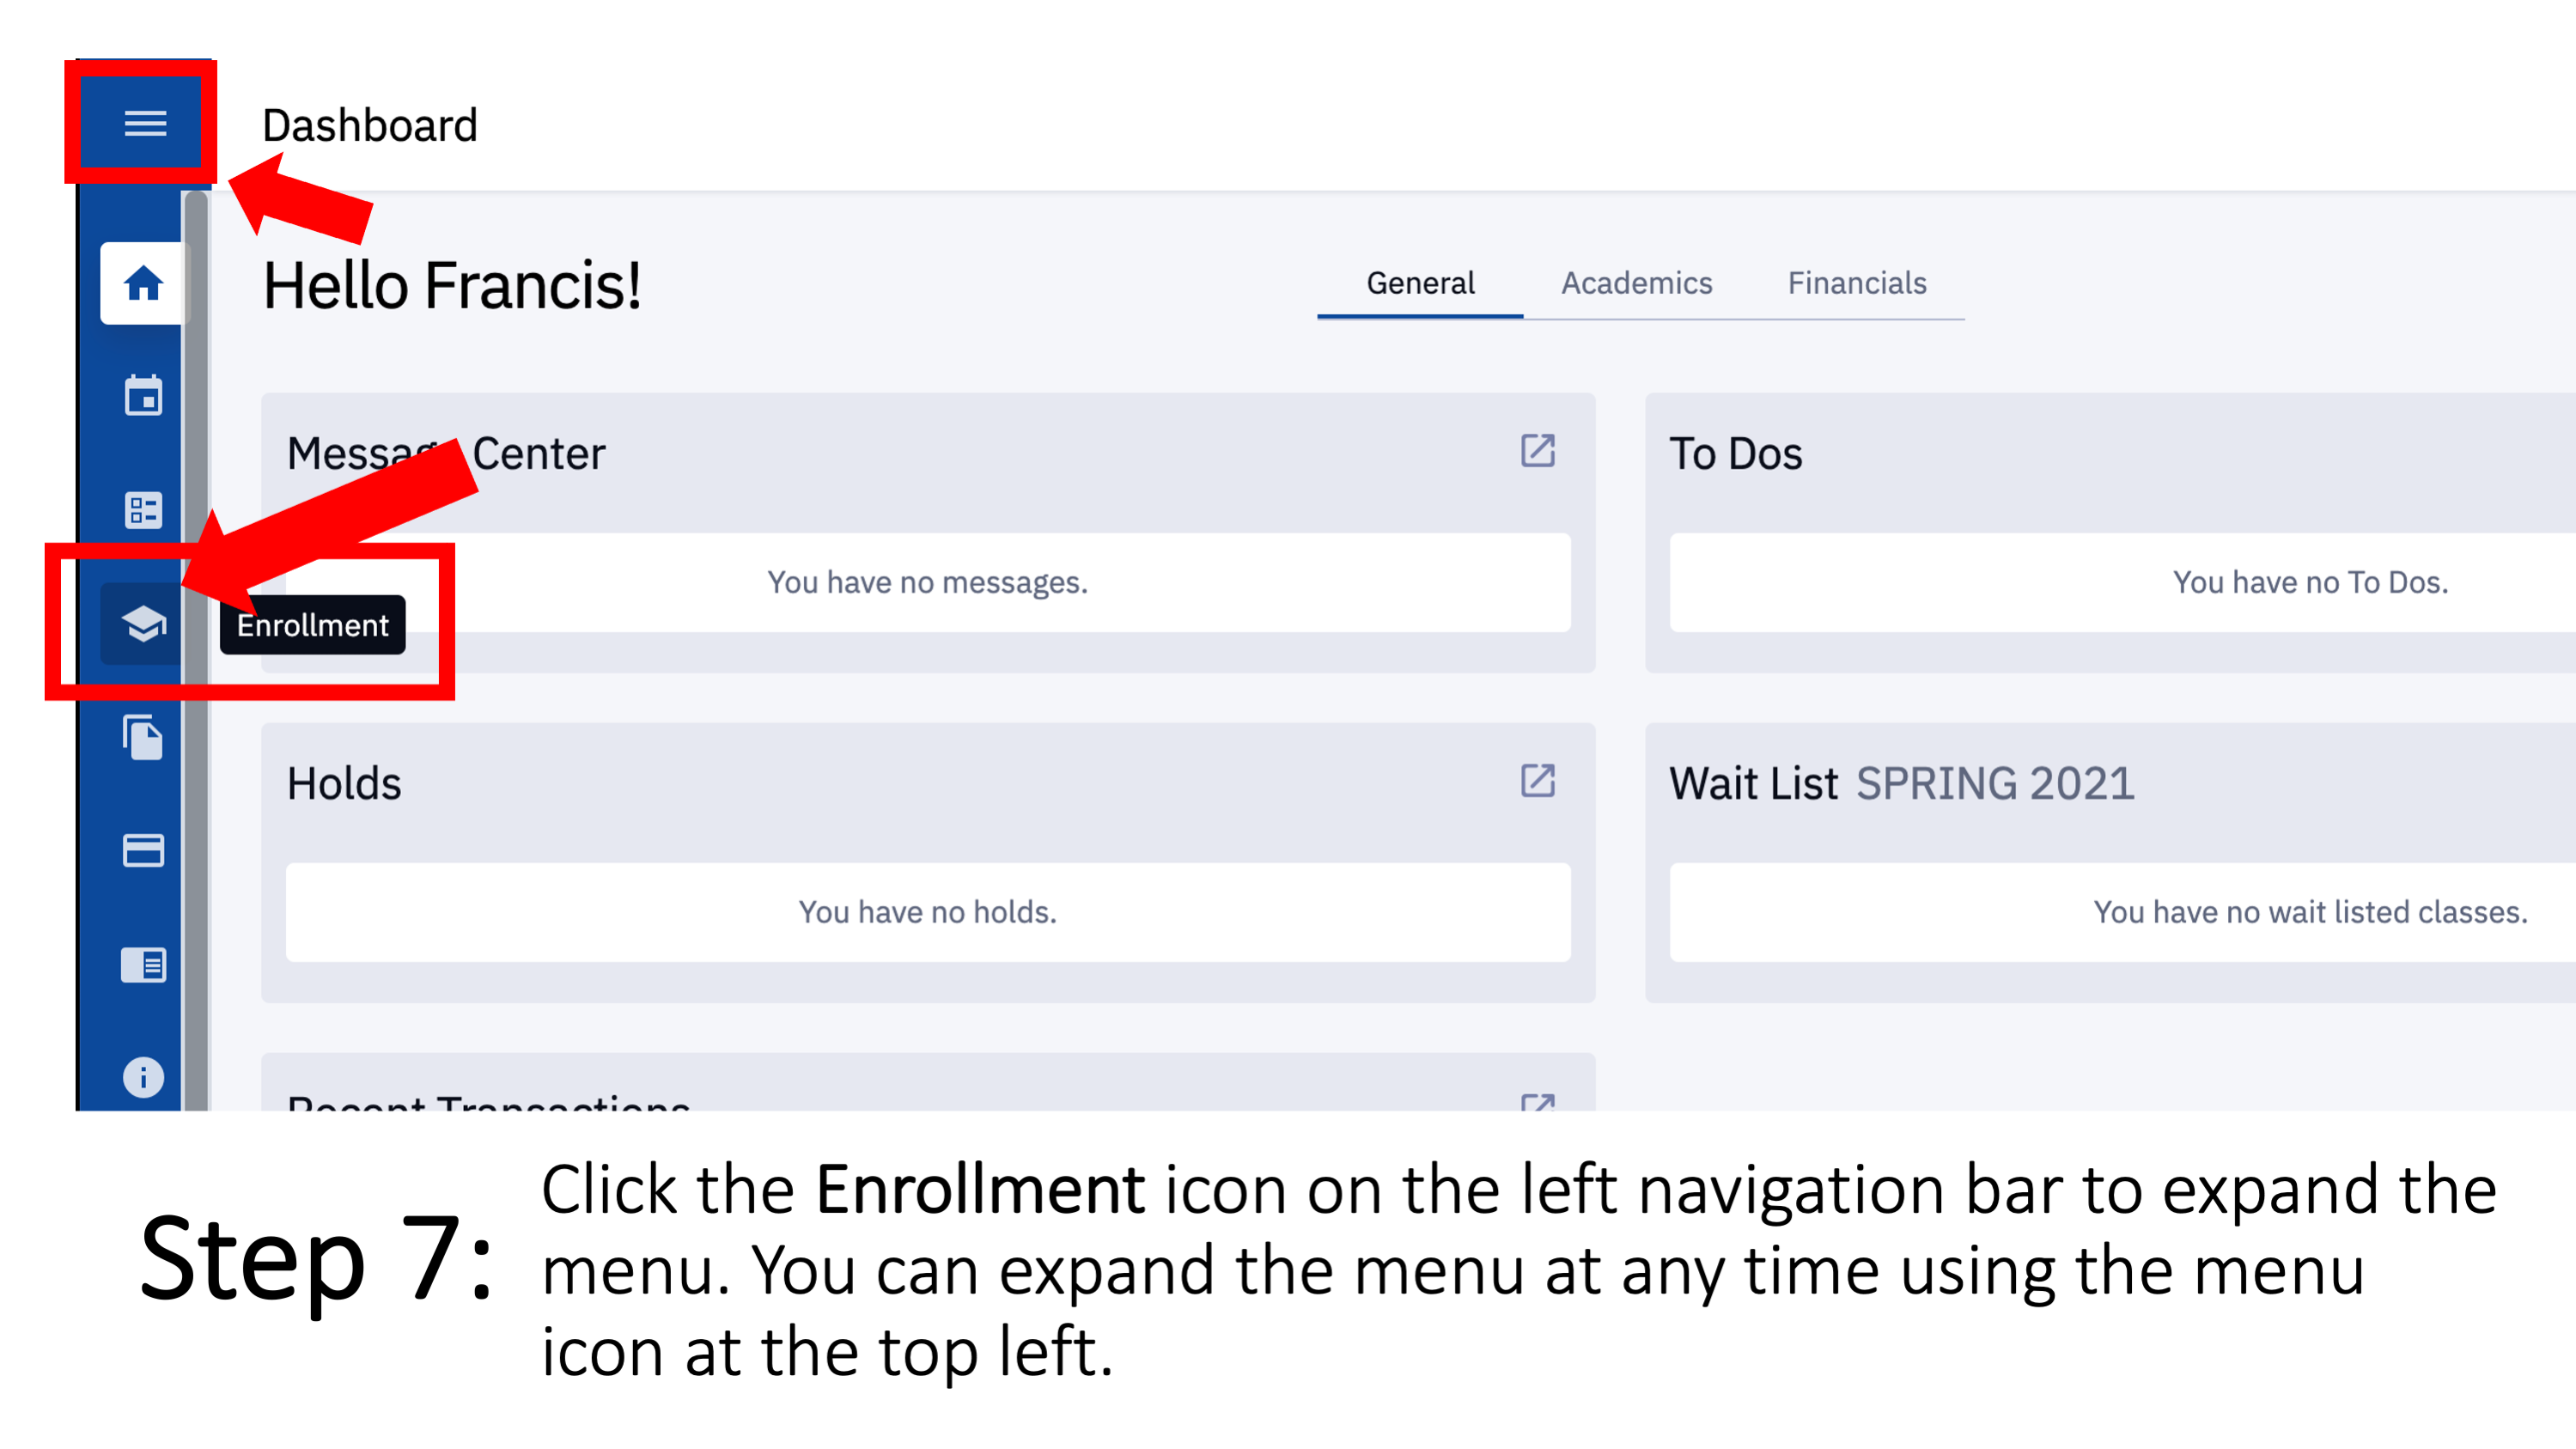 Step 7: Click the Enrollment icon on the left navigation bar to expand the menu. You can expand the menu at any time using the menu icon at the top left.